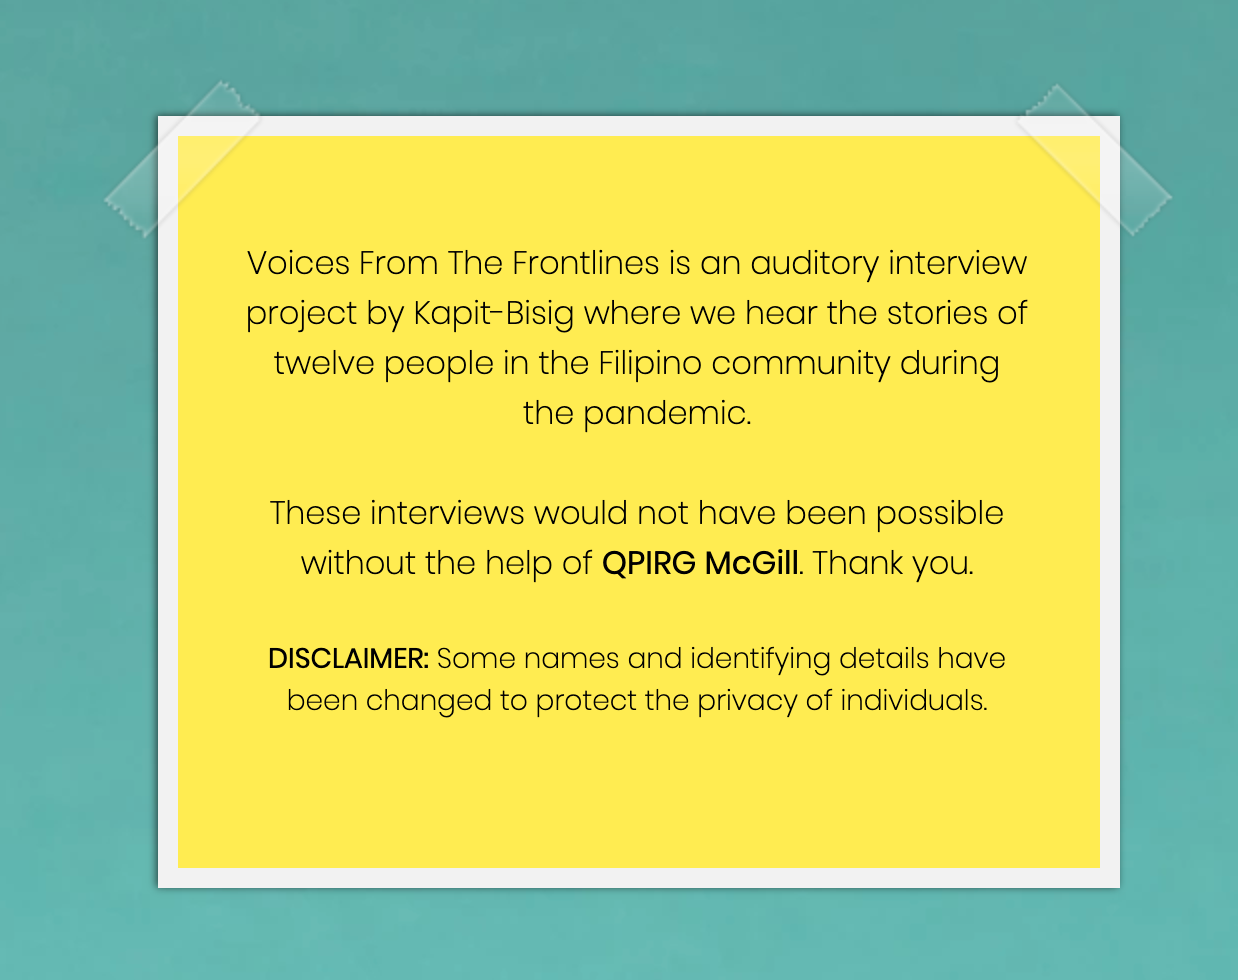 [Voices From the Frontlines is an auditory interview project by Kapit-Basig where we hear the stories of twelve people in the Filipino community during the pandemic. These interviews would not have been possible without the help of QPIRG-McGill. Thank you. DISCLAIMER: Some names and identifying details have been changed to protect the privacy of individuals.]